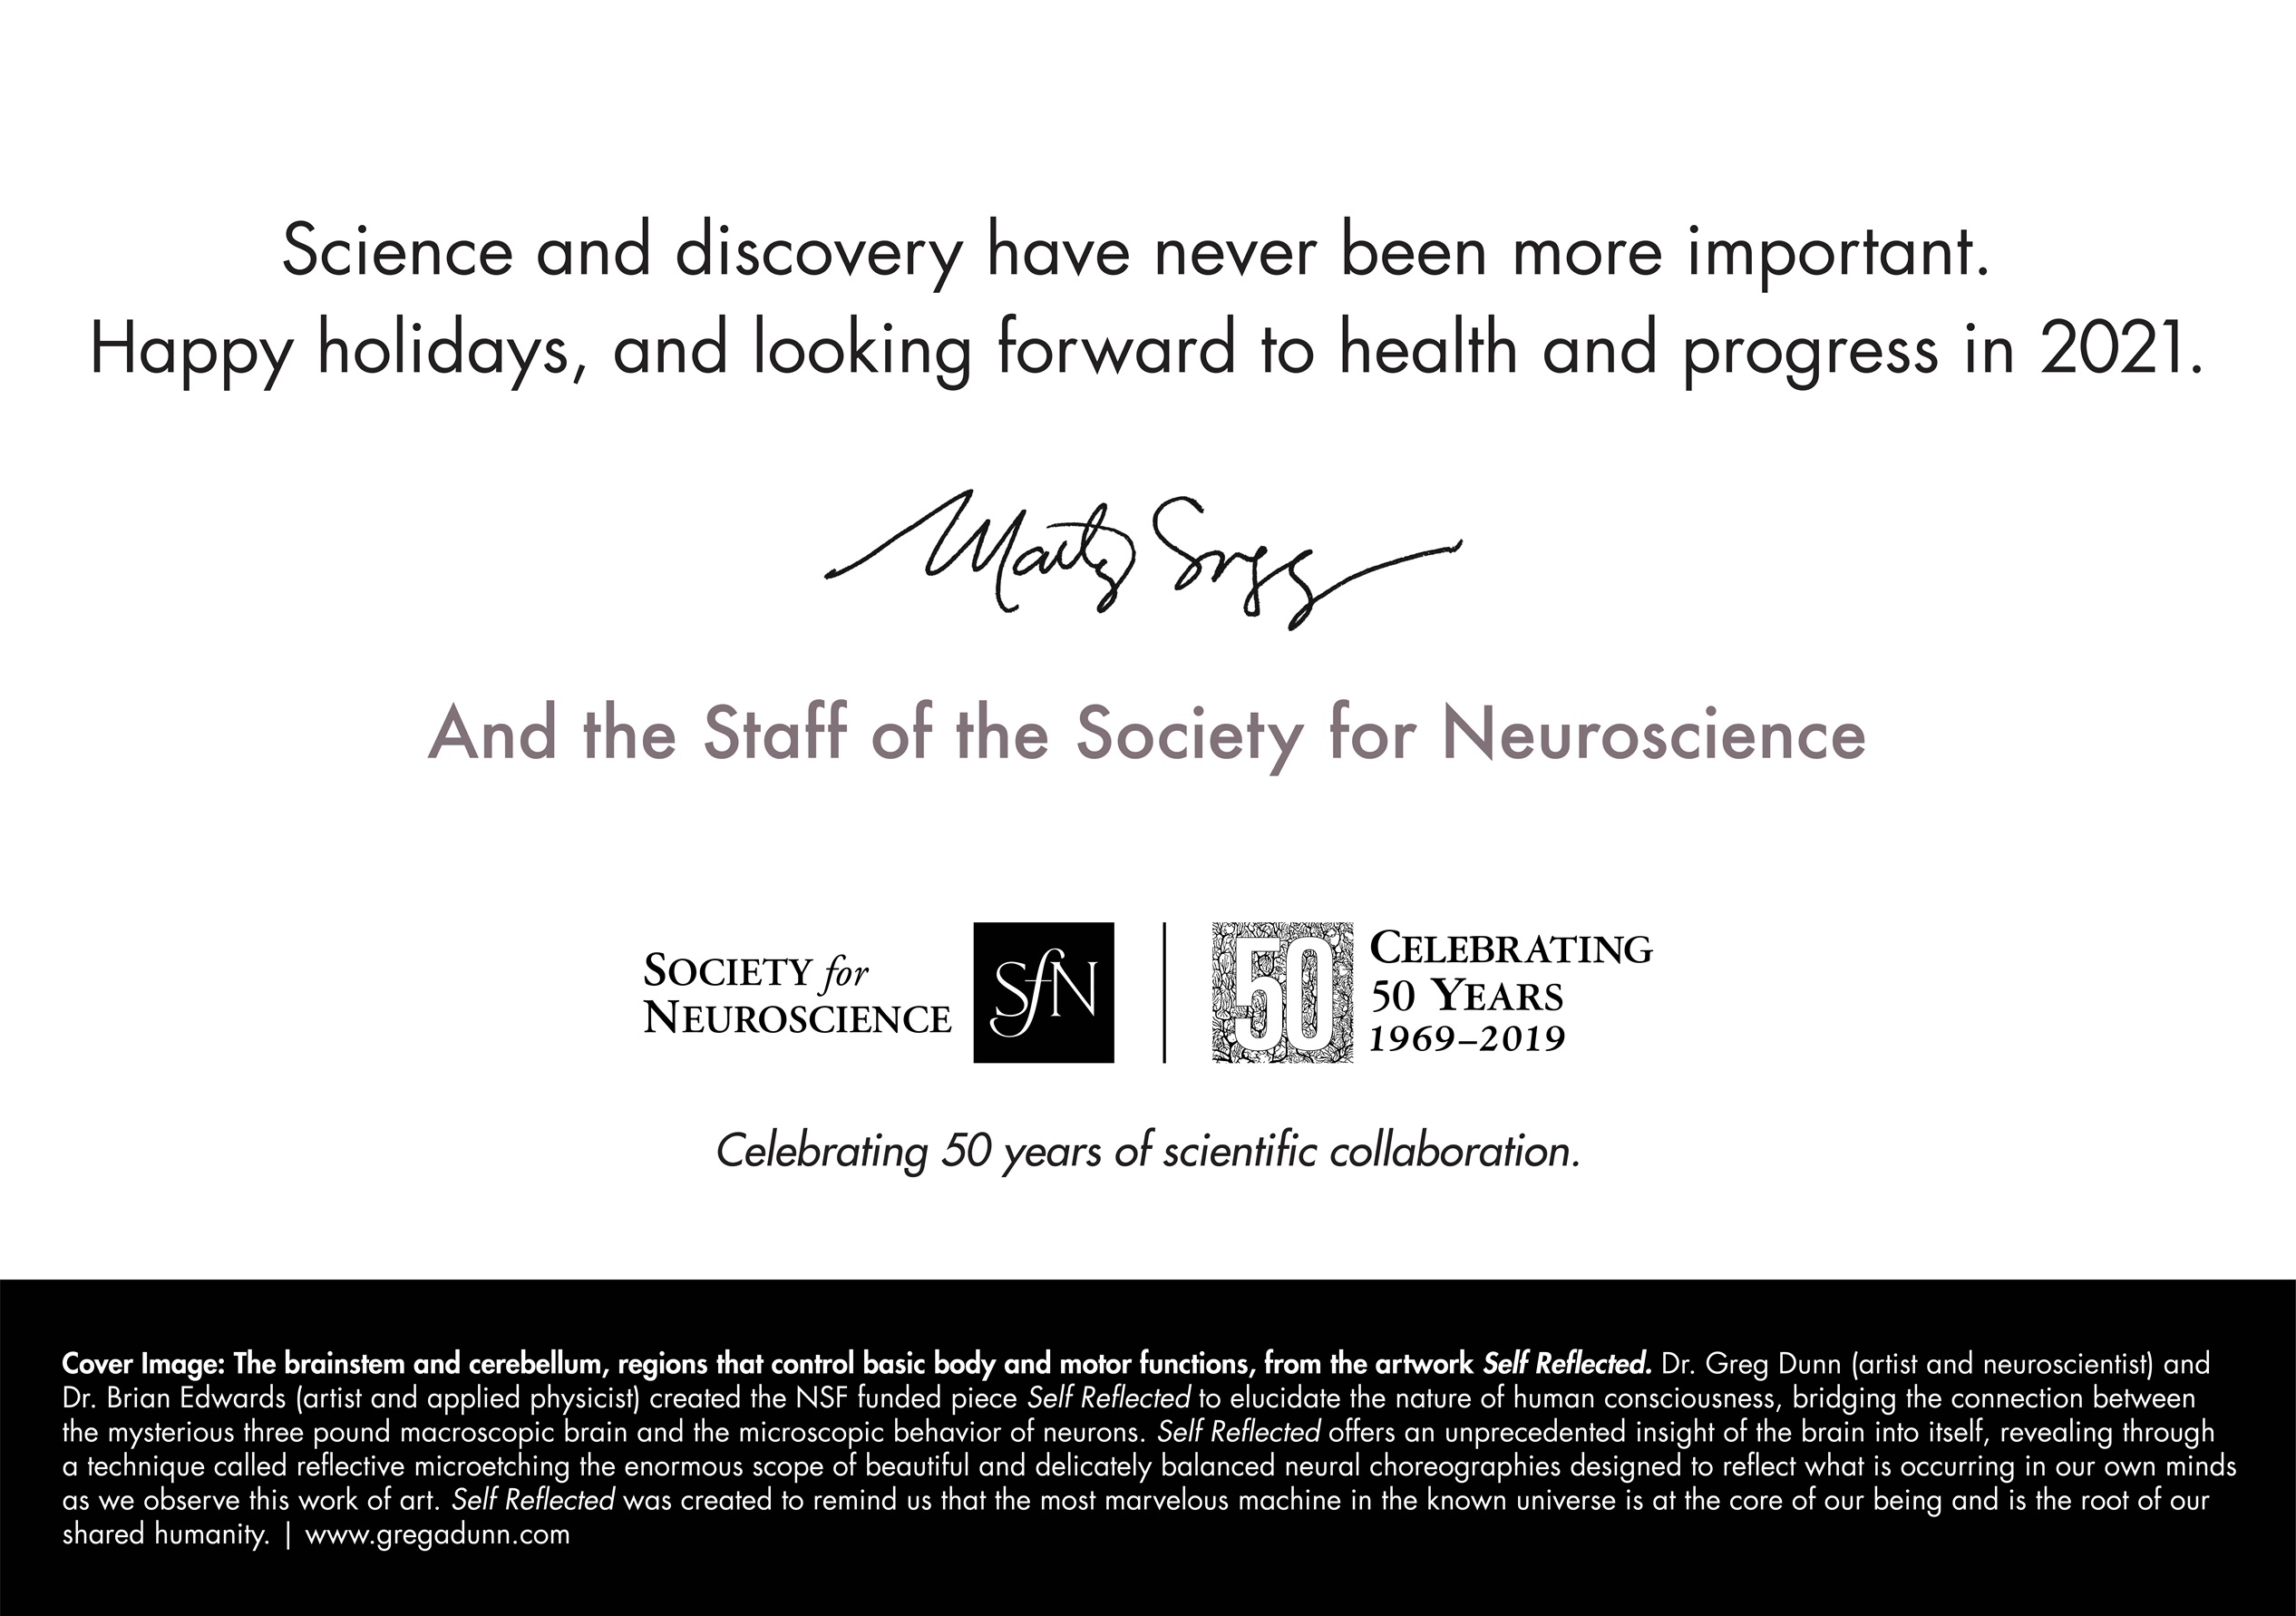 "Science and discovery have never been more important. Happy holidays, and looking forward to health and progress in 2021. Marty Saggese and the Staff of the Society for Neuroscience. Cover image: the brainstem and cerebellum, regions that control basic body and motor functions from the artwork Self Reflected. Dr. Greg Dunn (artist and neuroscientist) and Dr. Brian Edwards (artist and applied physicist) created the NSF funded piece Self Reflected to elucidate the nature of human consciousness, bridging the connection between the mysterious three pound macroscopic brain and the microscopic behavior of neurons. Self Reflected offers an unprecedented insight of the brain into itself, revealing through a technique called reflective microetching the enormous scope of beautiful and delicately balanced neural choreographies designed to reflect what is occurring in our own minds as we observe this work of art. Self Reflected was created to remind us that the most marvelous machine in the known universe is at the core of our being and is the root of our shared humanity. | www.gregdunn.com"